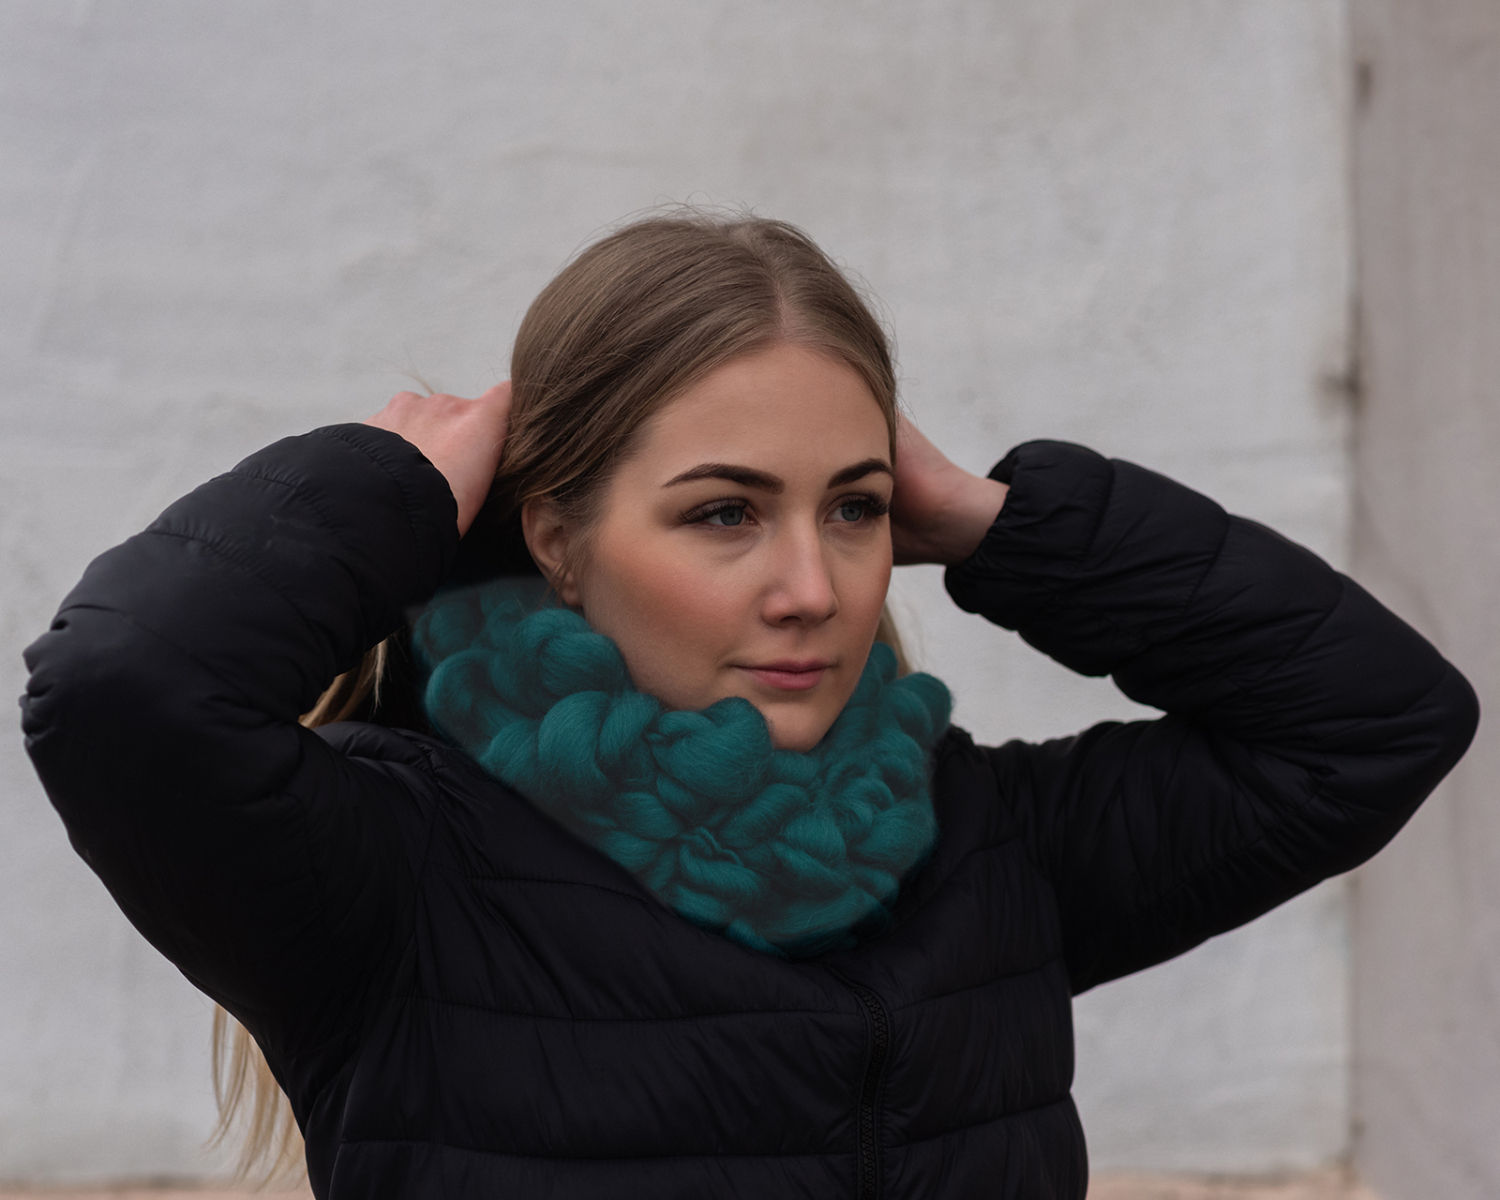 Petrol Green Chunky Knitted Infinity Scarf